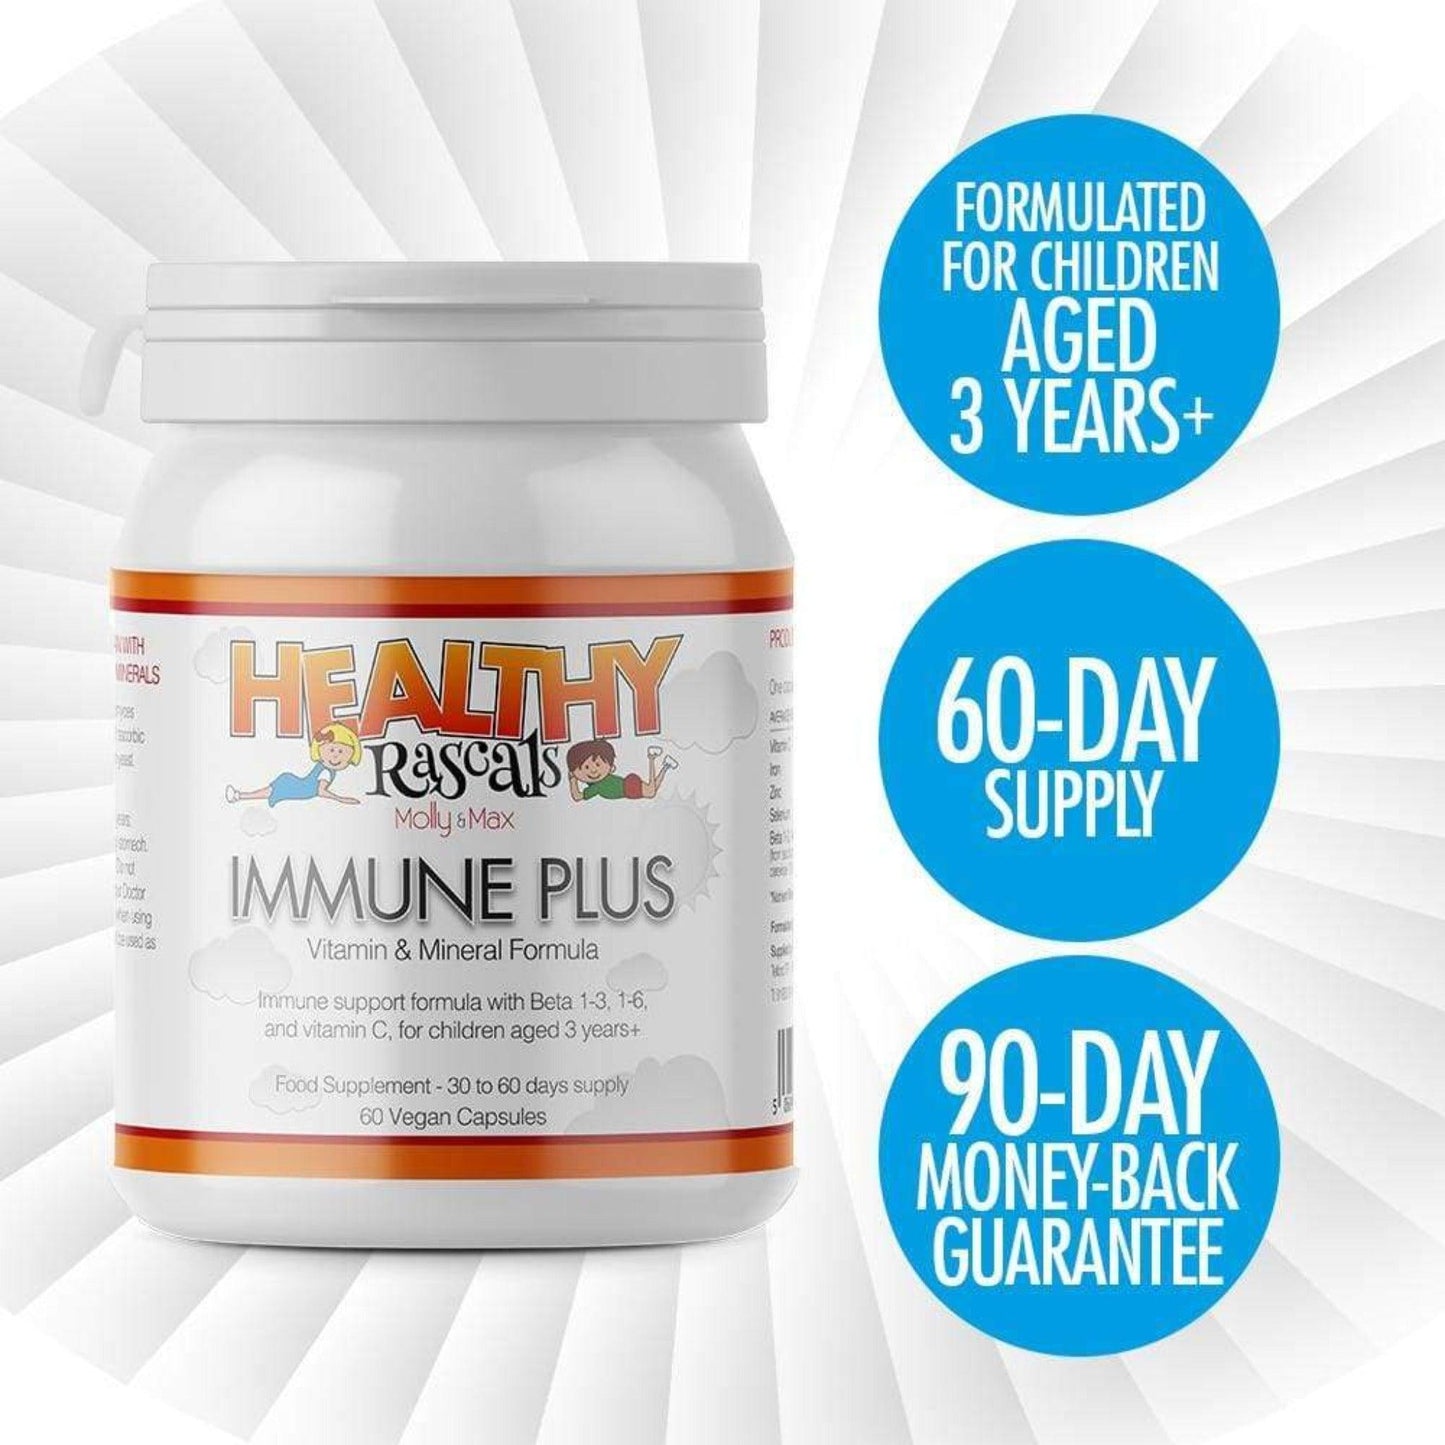 Healthy Rascals Immune Plus for kids, 60-day supply with a money-back guarantee.